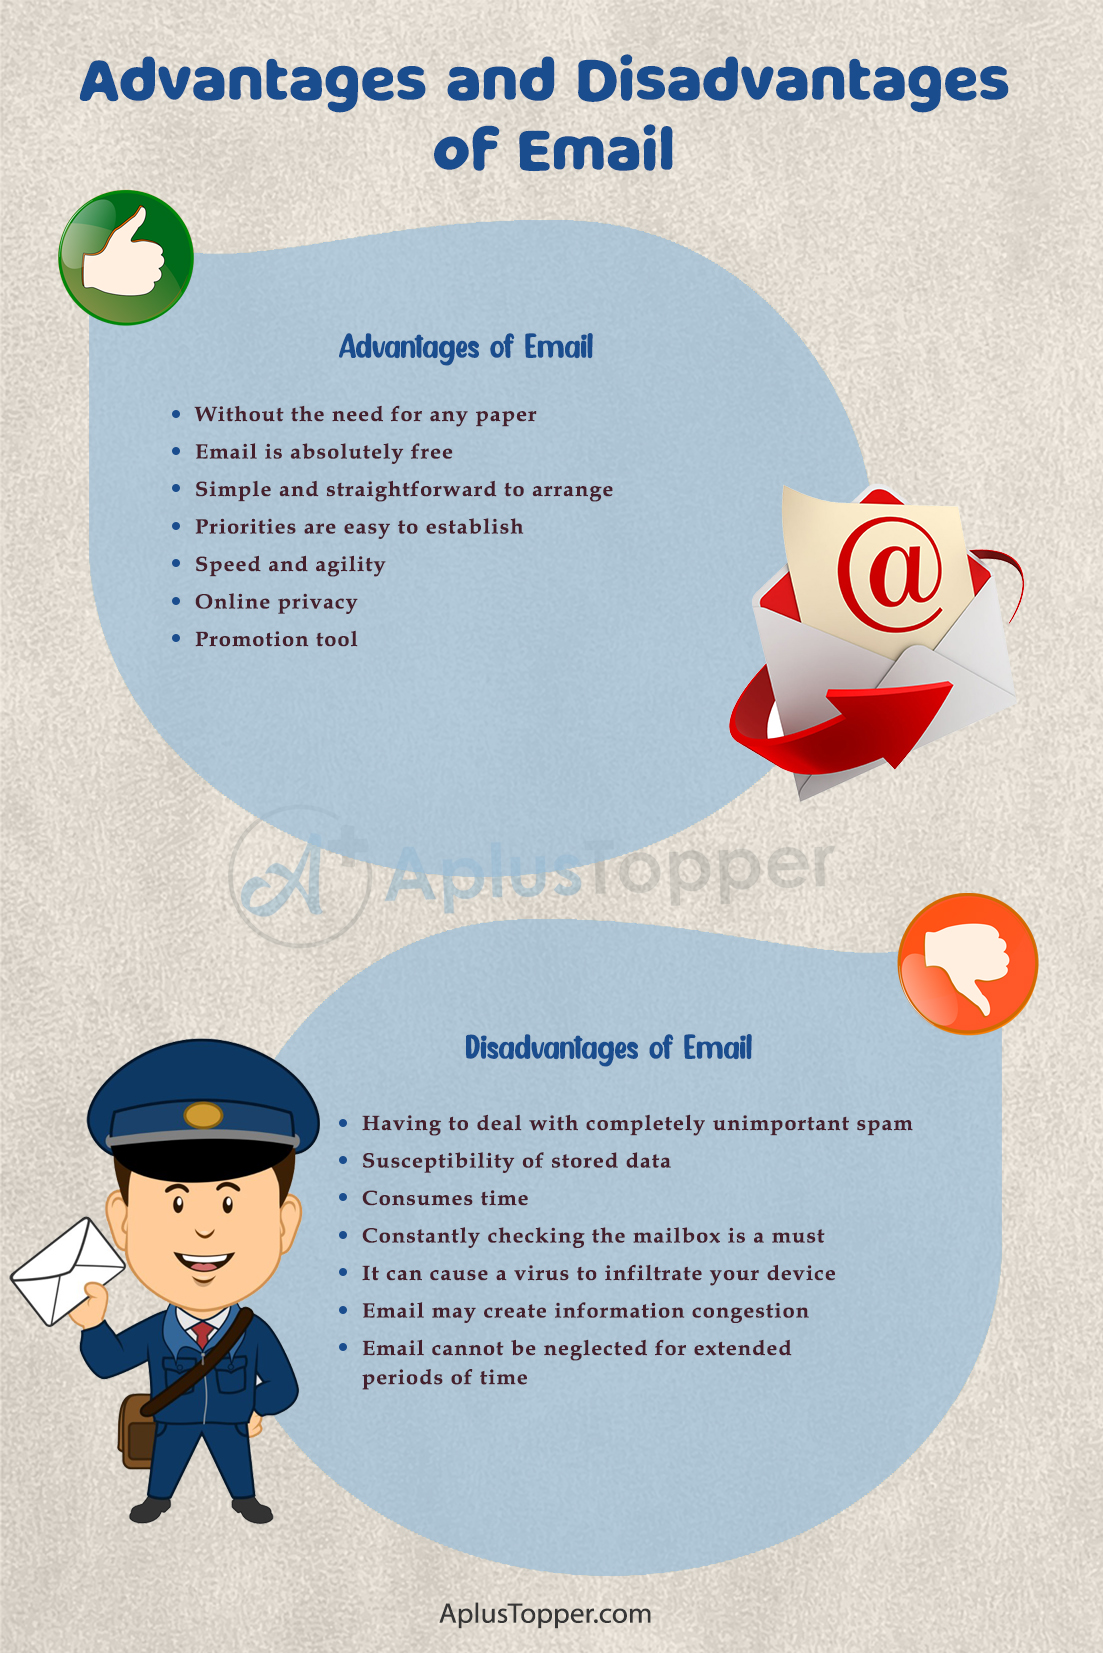 Advantages and Disadvantages of Email2